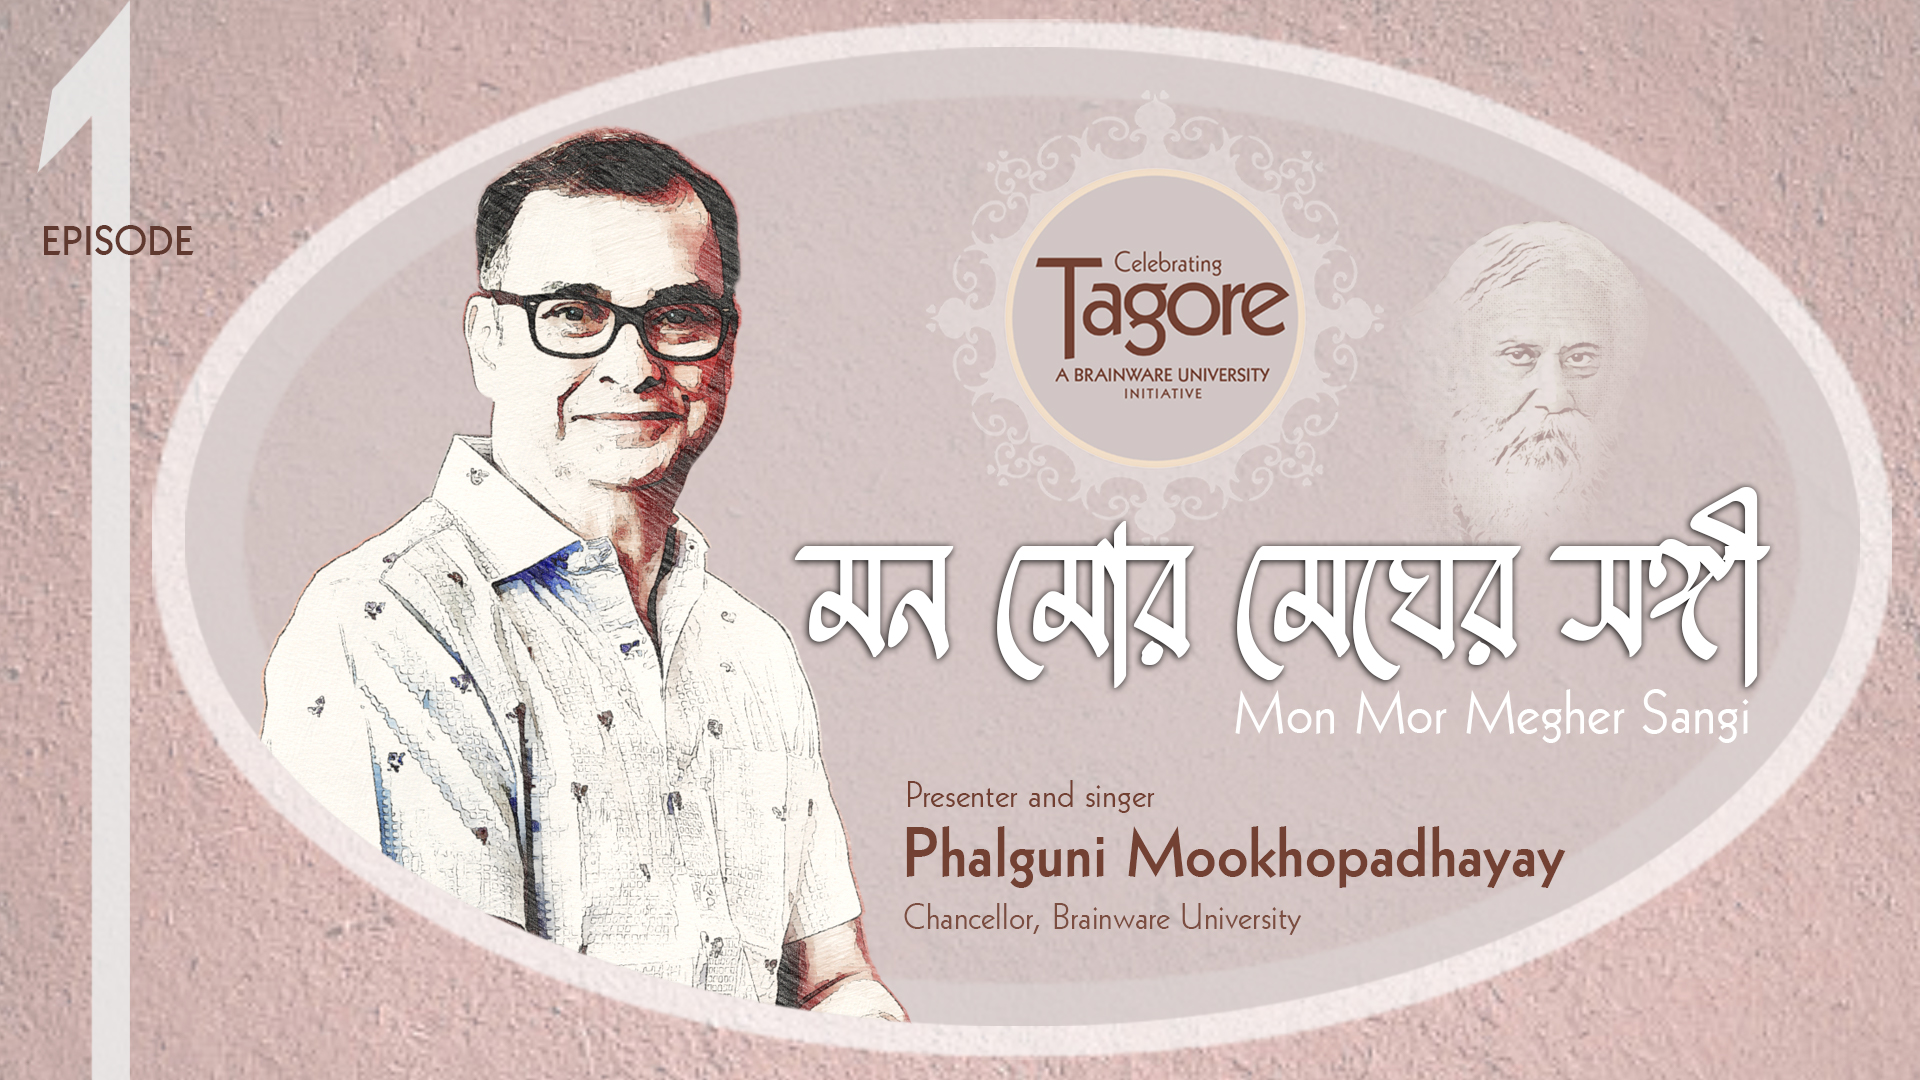 Celebrating Tagore: A Brainware University initiative featuring Phalguni Mookhopadhayay performing Rabindra Sangeet, with the song title 'Mon Mor Megher Sangi' in Bengali script.